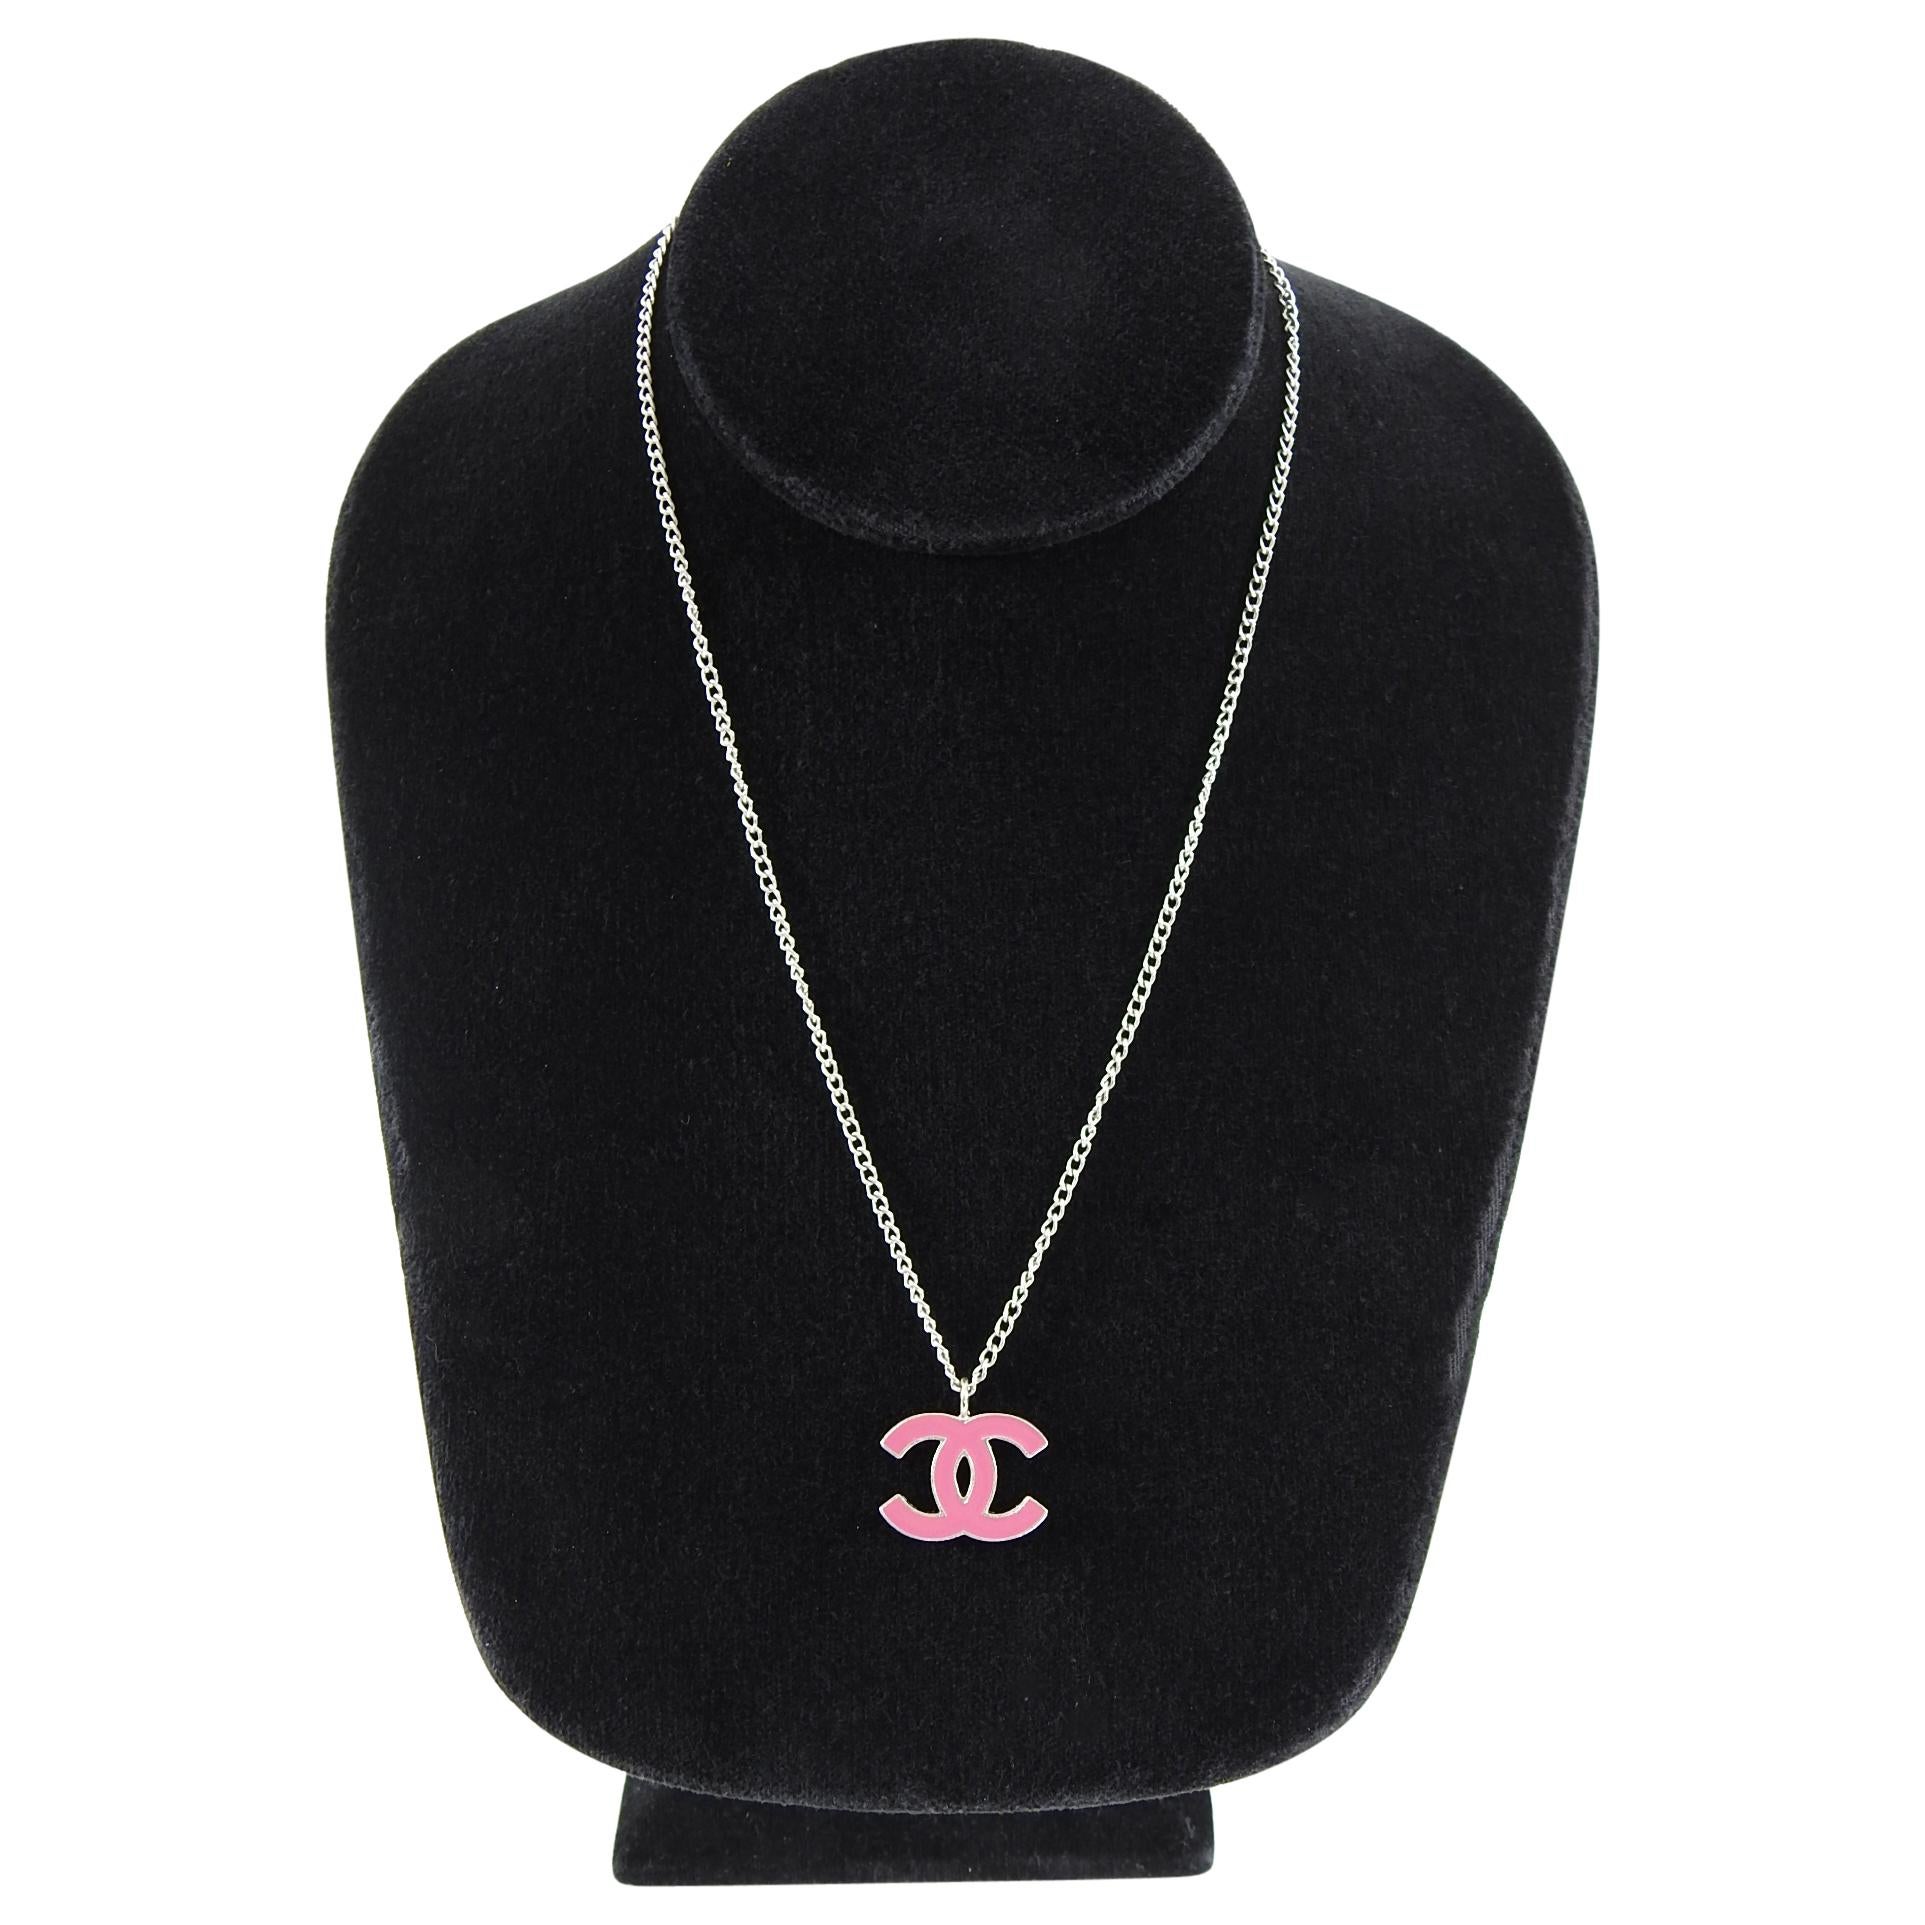 Chanel 2004 Spring Silver and Pink Enamel CC Pendant Necklace.  Classic CC logo pendant on a silvertone thin chain.  Excellent pre-owned condition. Necklace is 16” long and pendant is 0.75” wide. 
